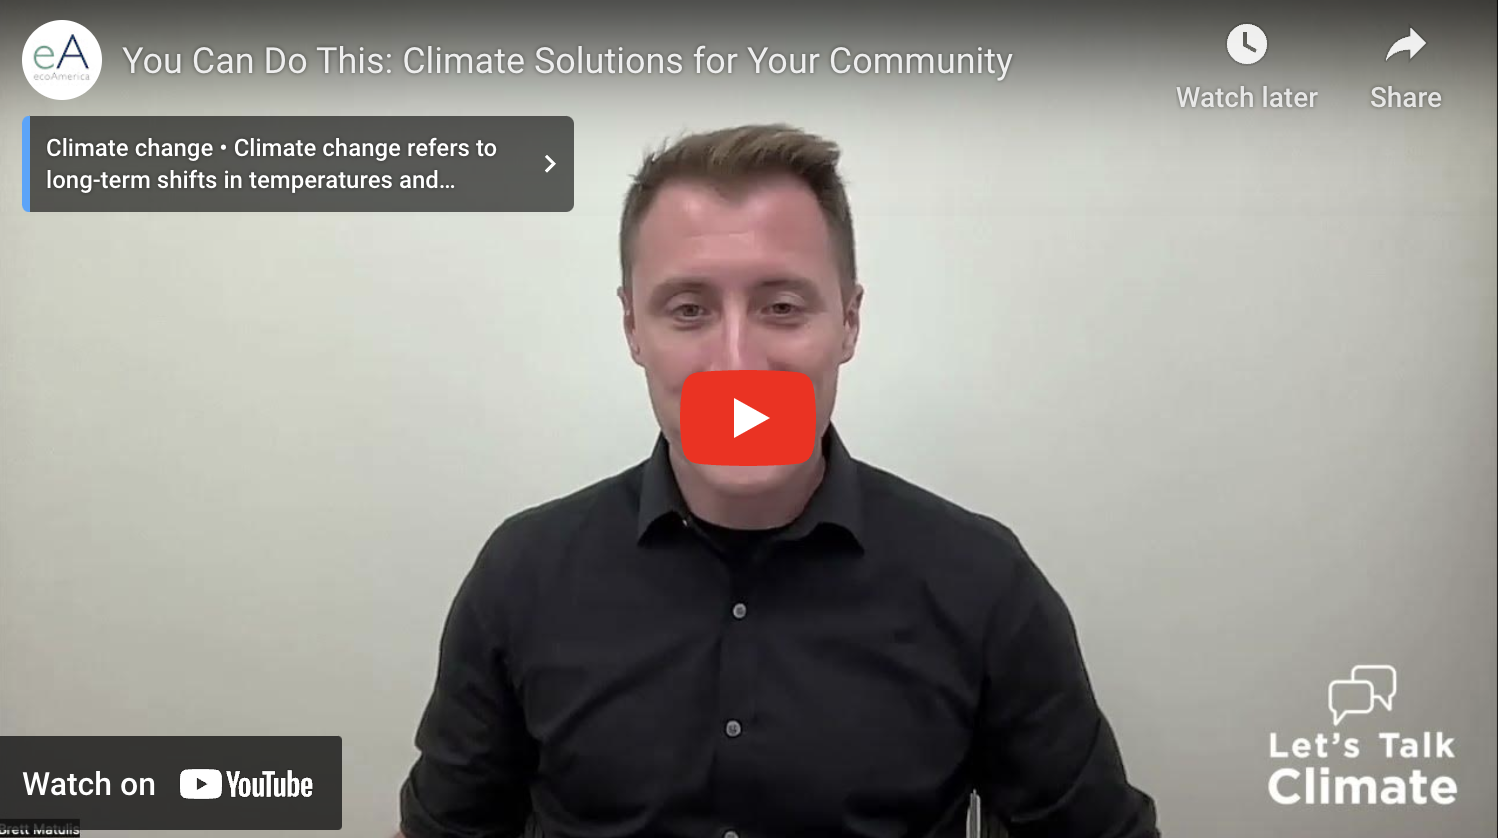 You Can Do This: Climate Solutions for Your Community